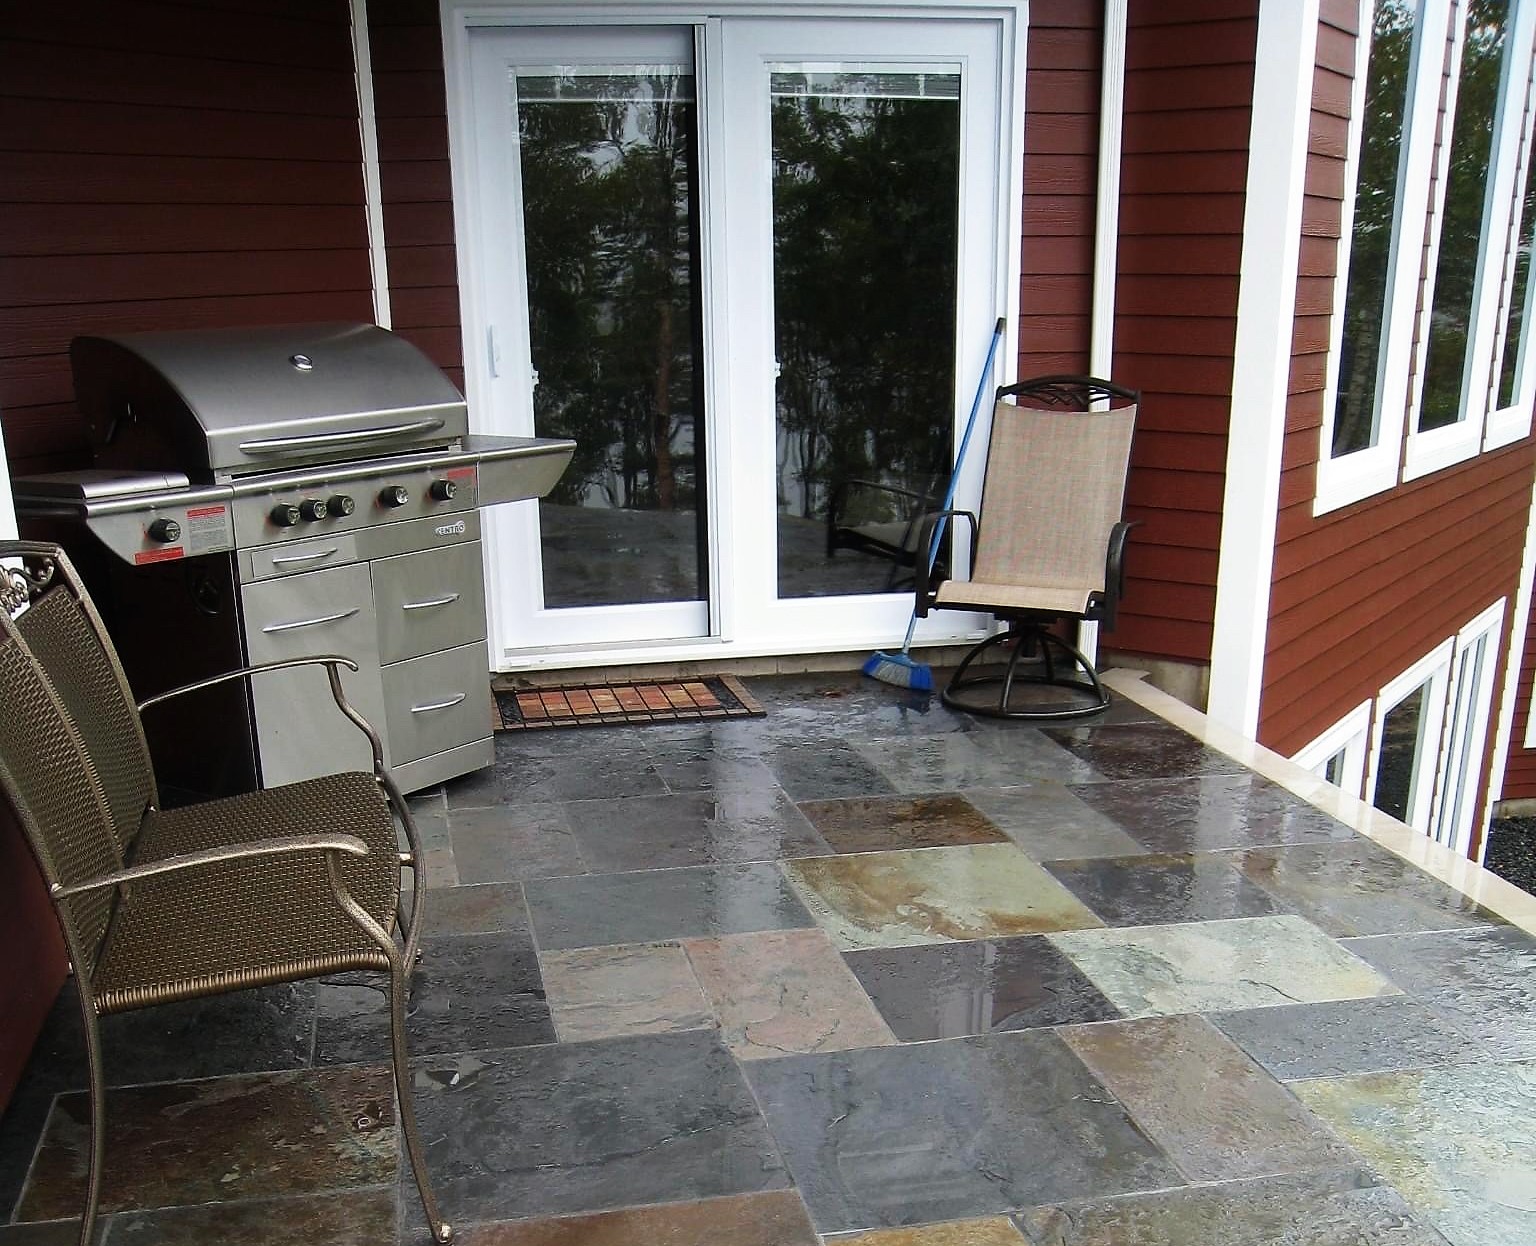 A patio with a scotia stone grill and chairs.